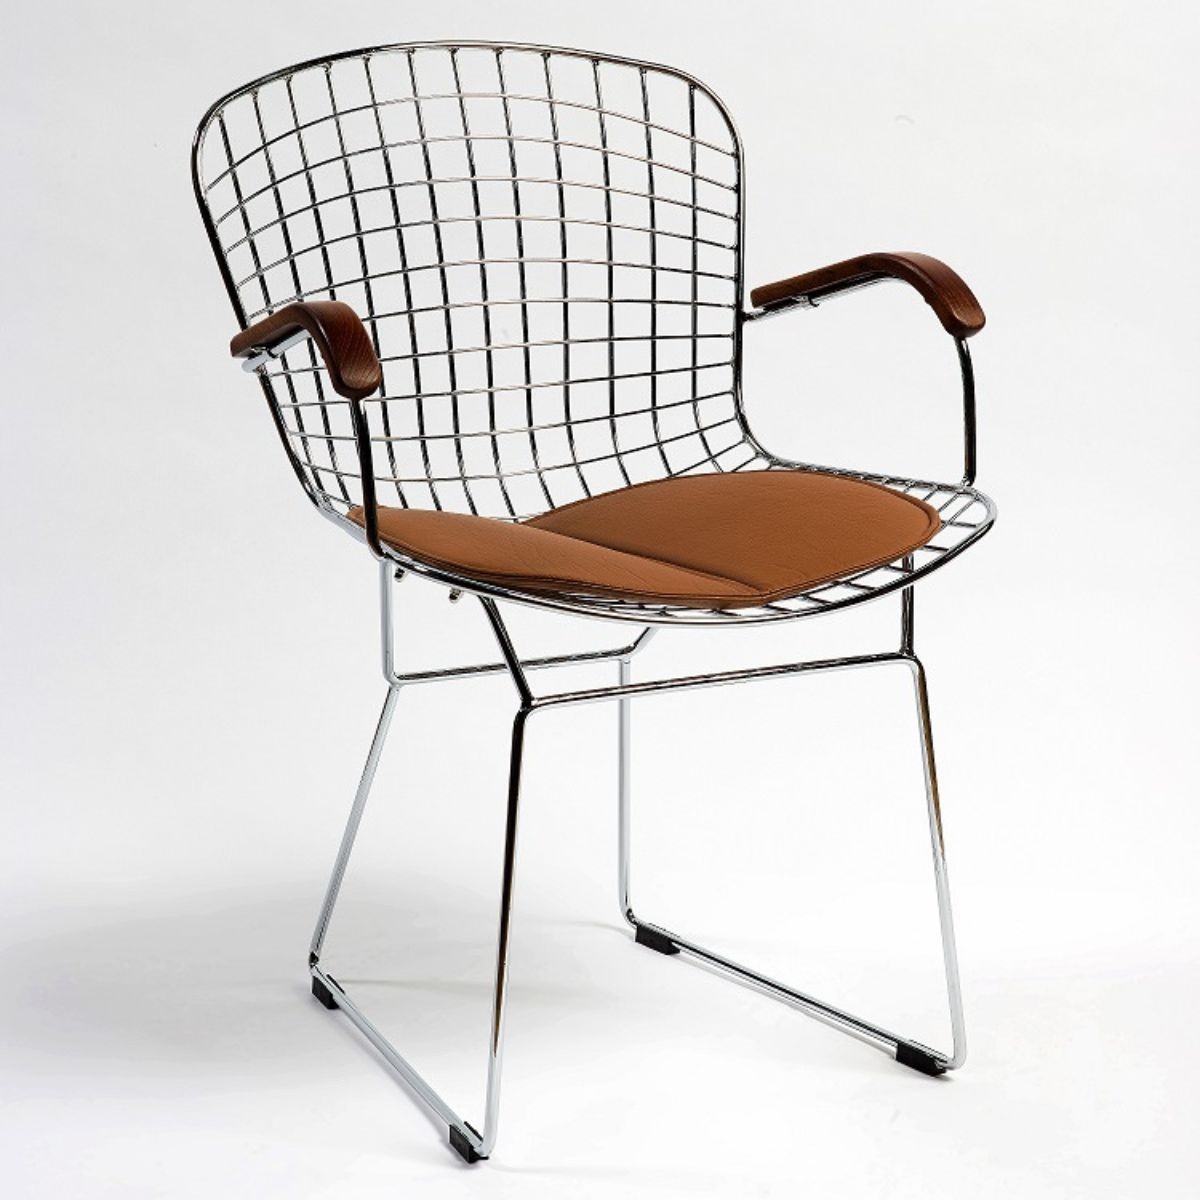 Chromed metal armchair with arms and brown cushion